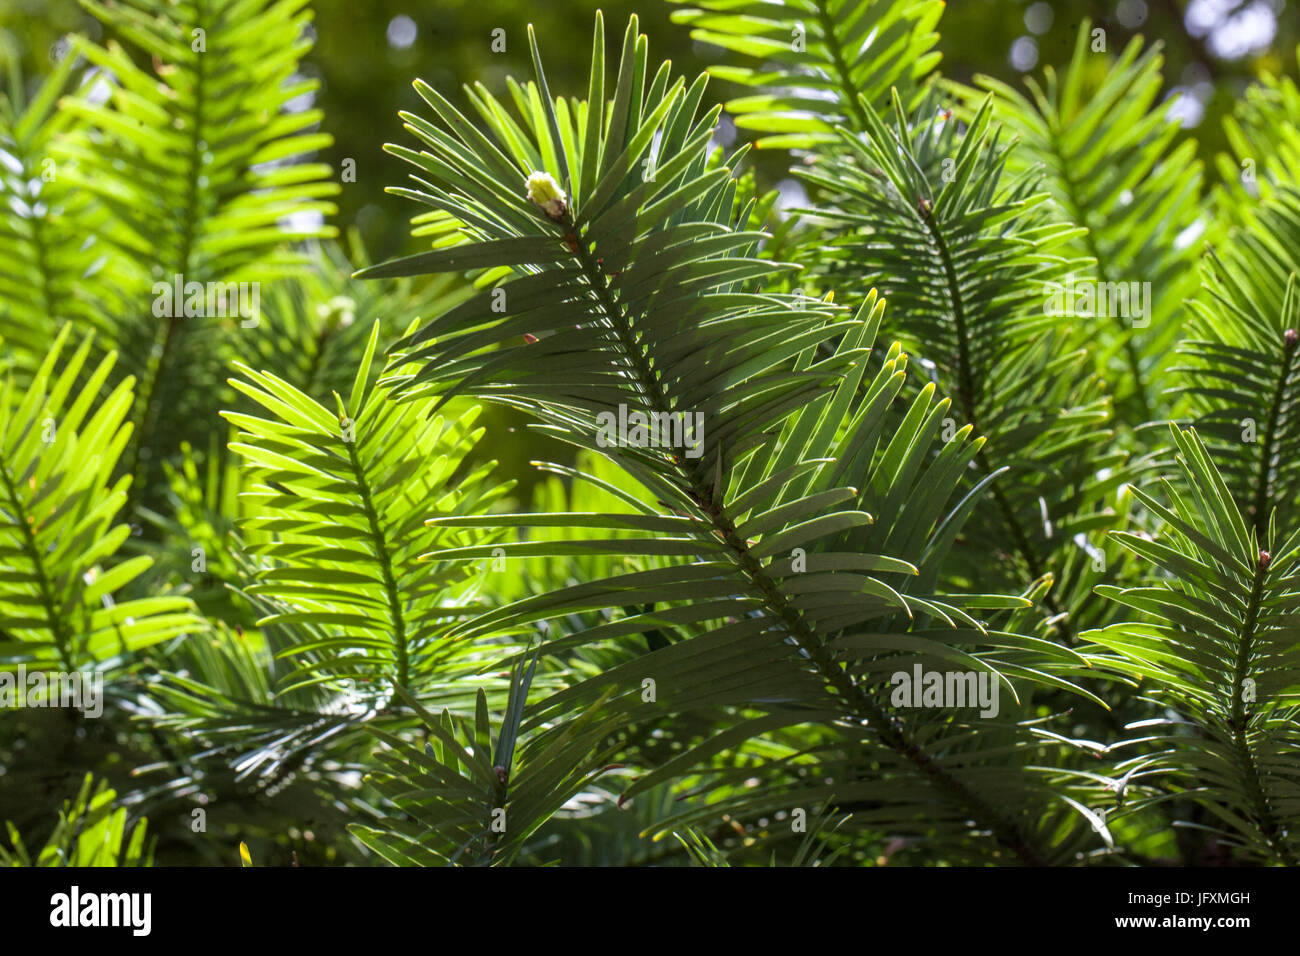 Wollemi Pine fossil, Wollemia nobilis conifer tree needles Stock Photo